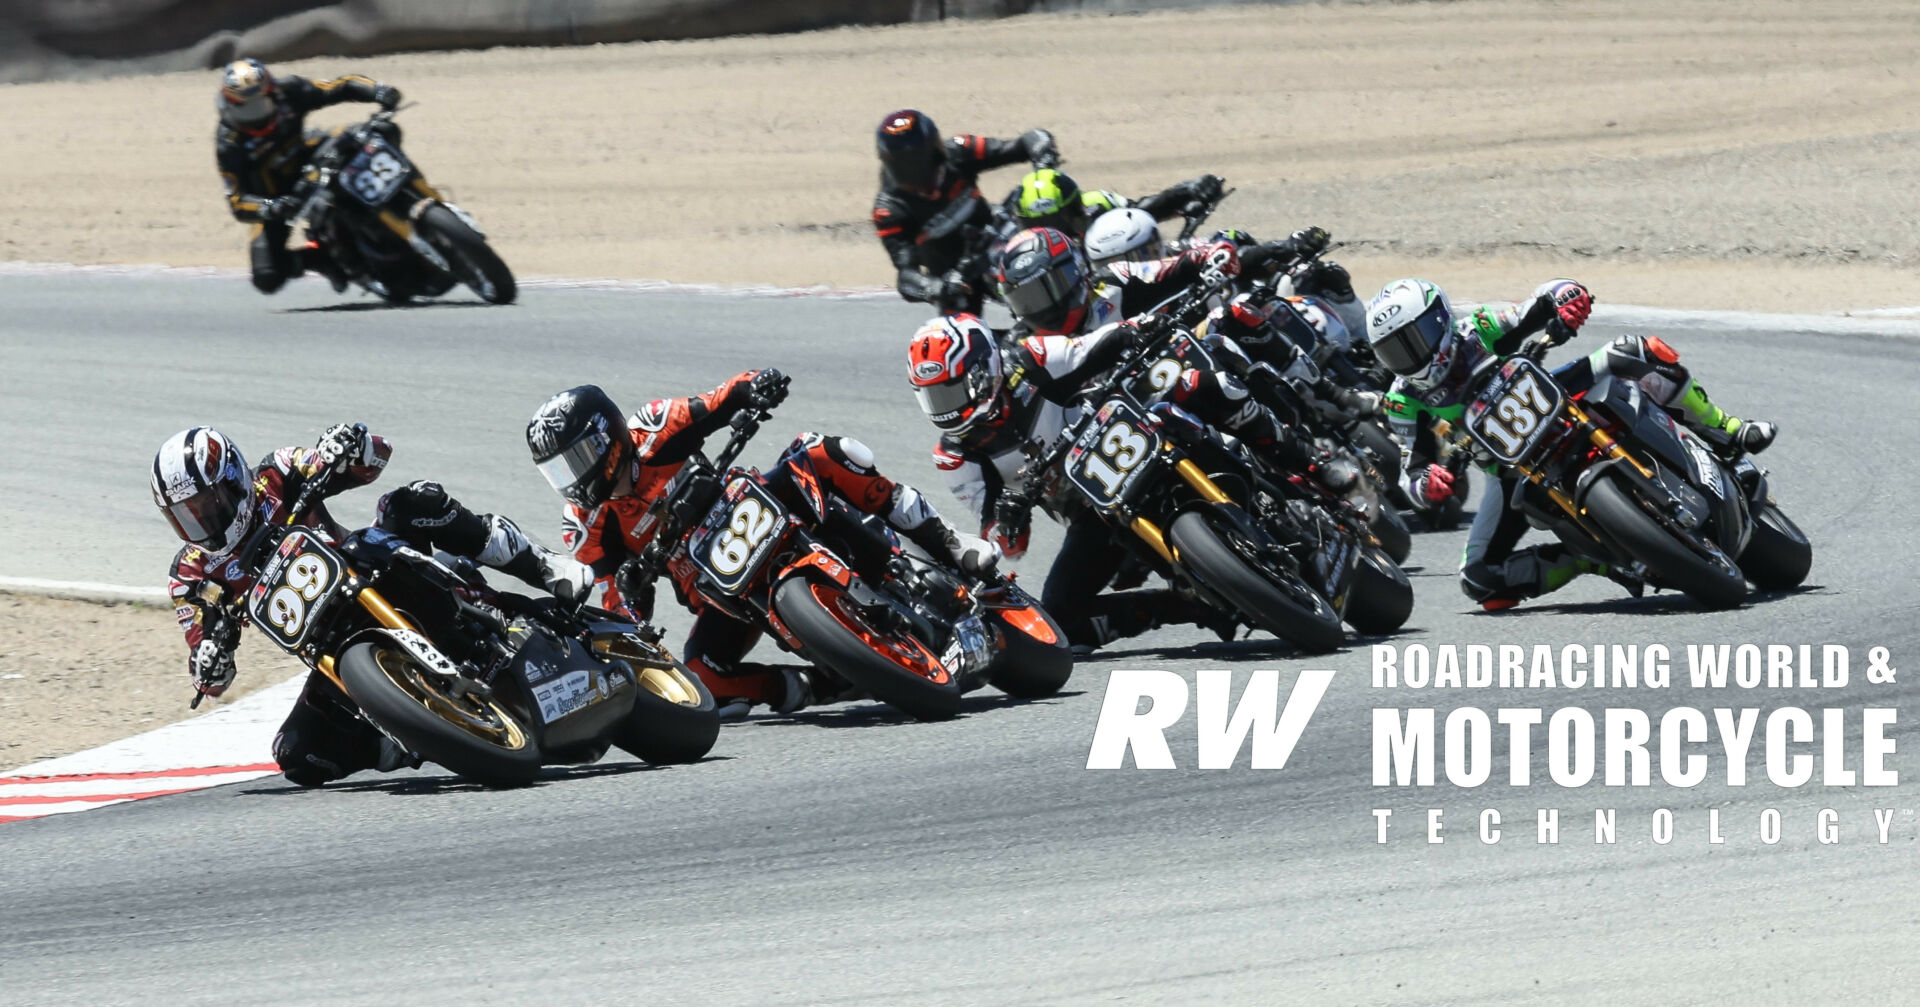 Early in the RSD Super Hooligan race at Laguna Seca, Stefano Mesa (137) on an Energica electric bike chased Jeremy McWilliams (99), Andy DiBrino (62), and Cory West (13), and led Tyler O'Hara, Nate Kern, Alex Taylor, and Josh Baird. Mesa raced Kern and Baird for sixth until slowing on the last lap with hot batteries, and finished 13th. Photos by Brian J. Nelson.